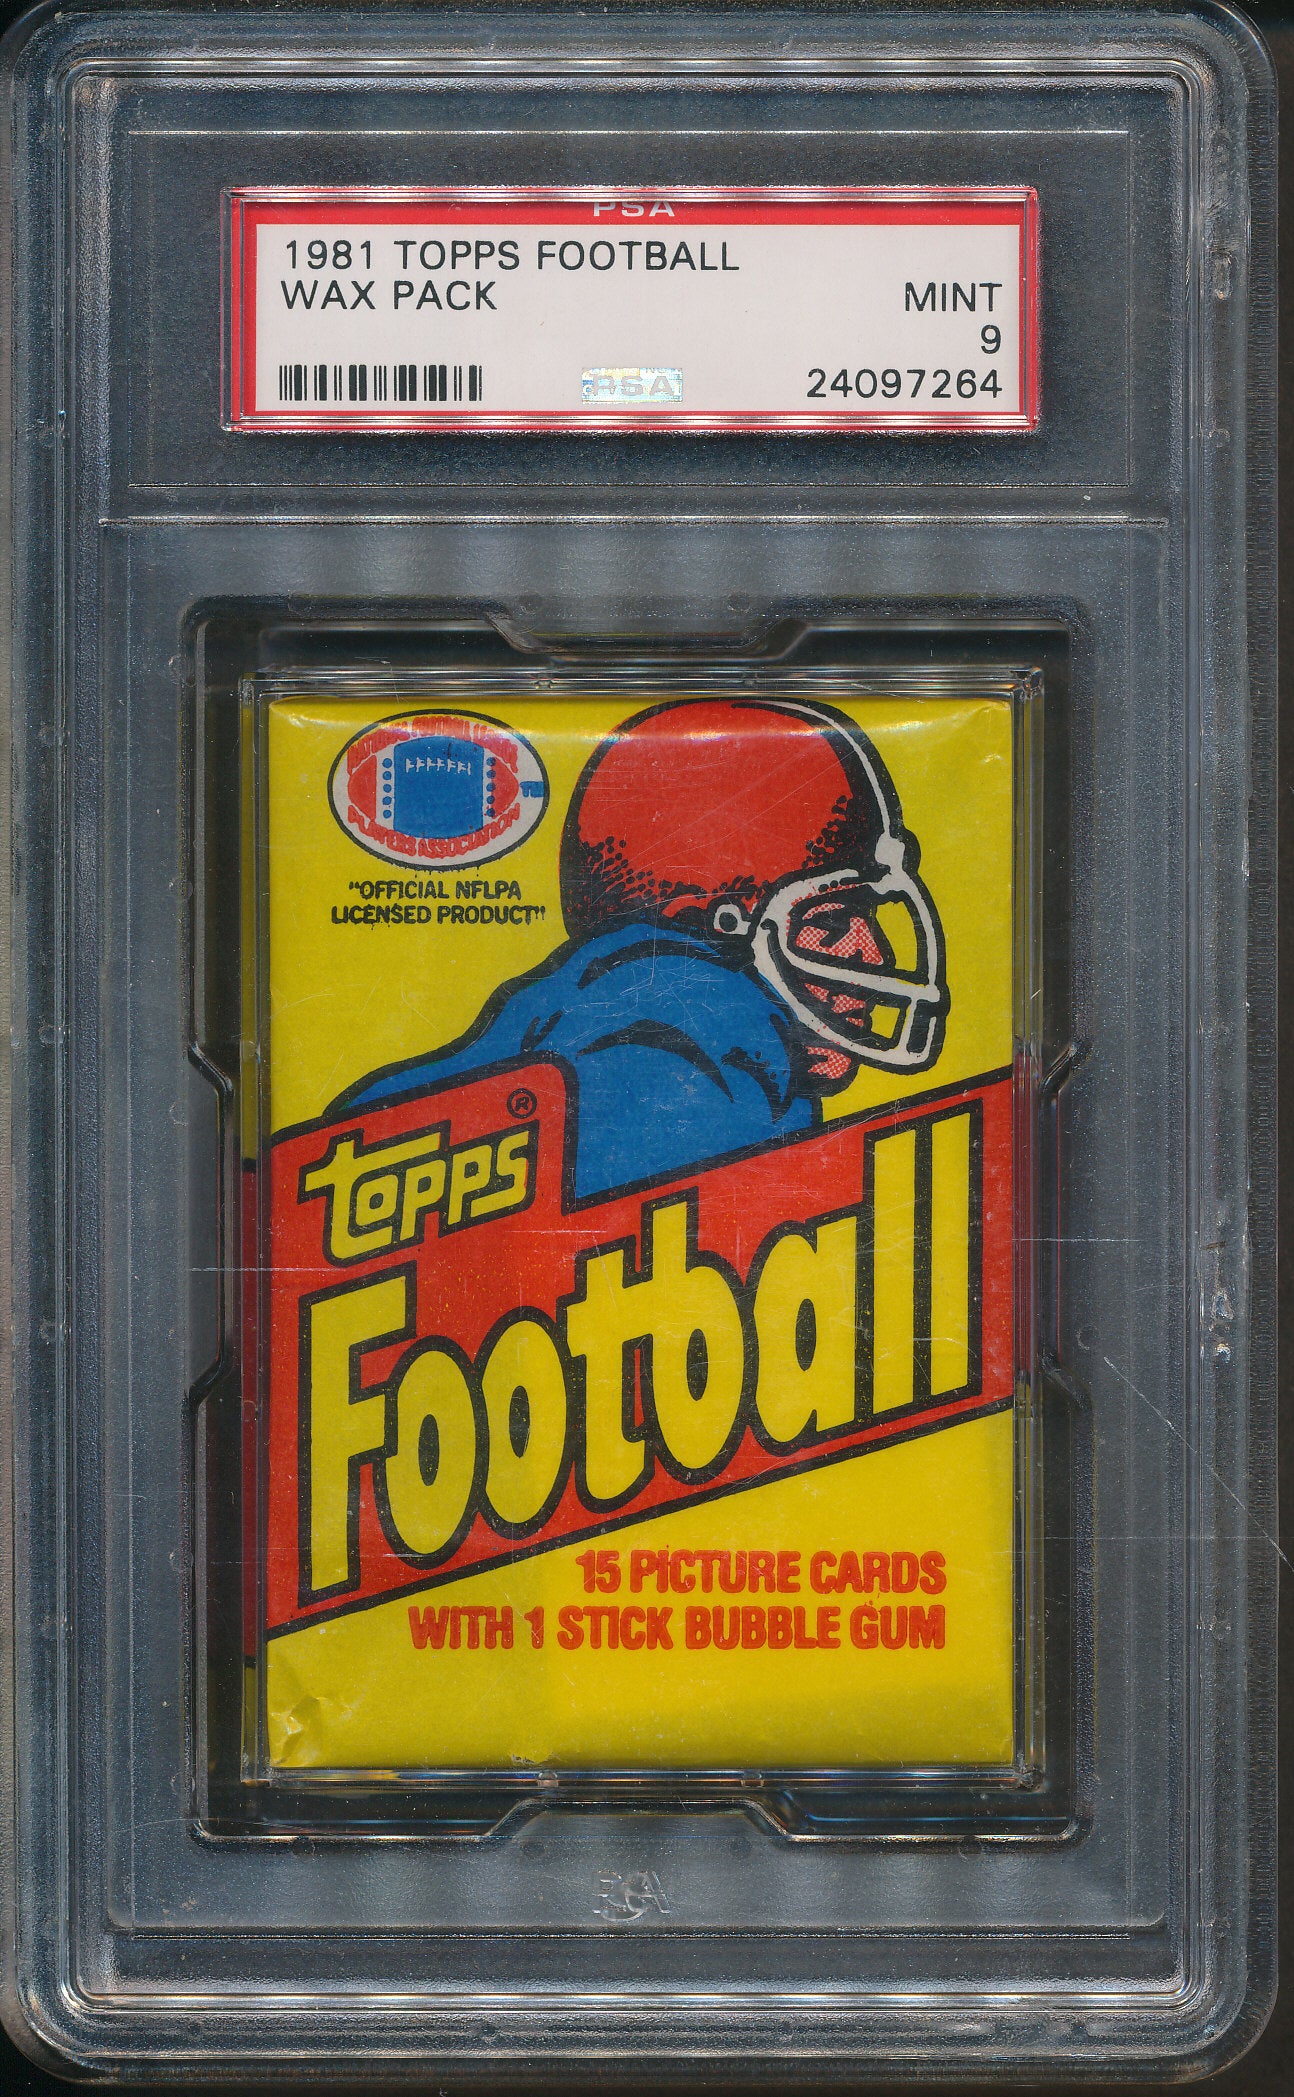 1981 Topps Football Unopened Wax Pack PSA MINT 9